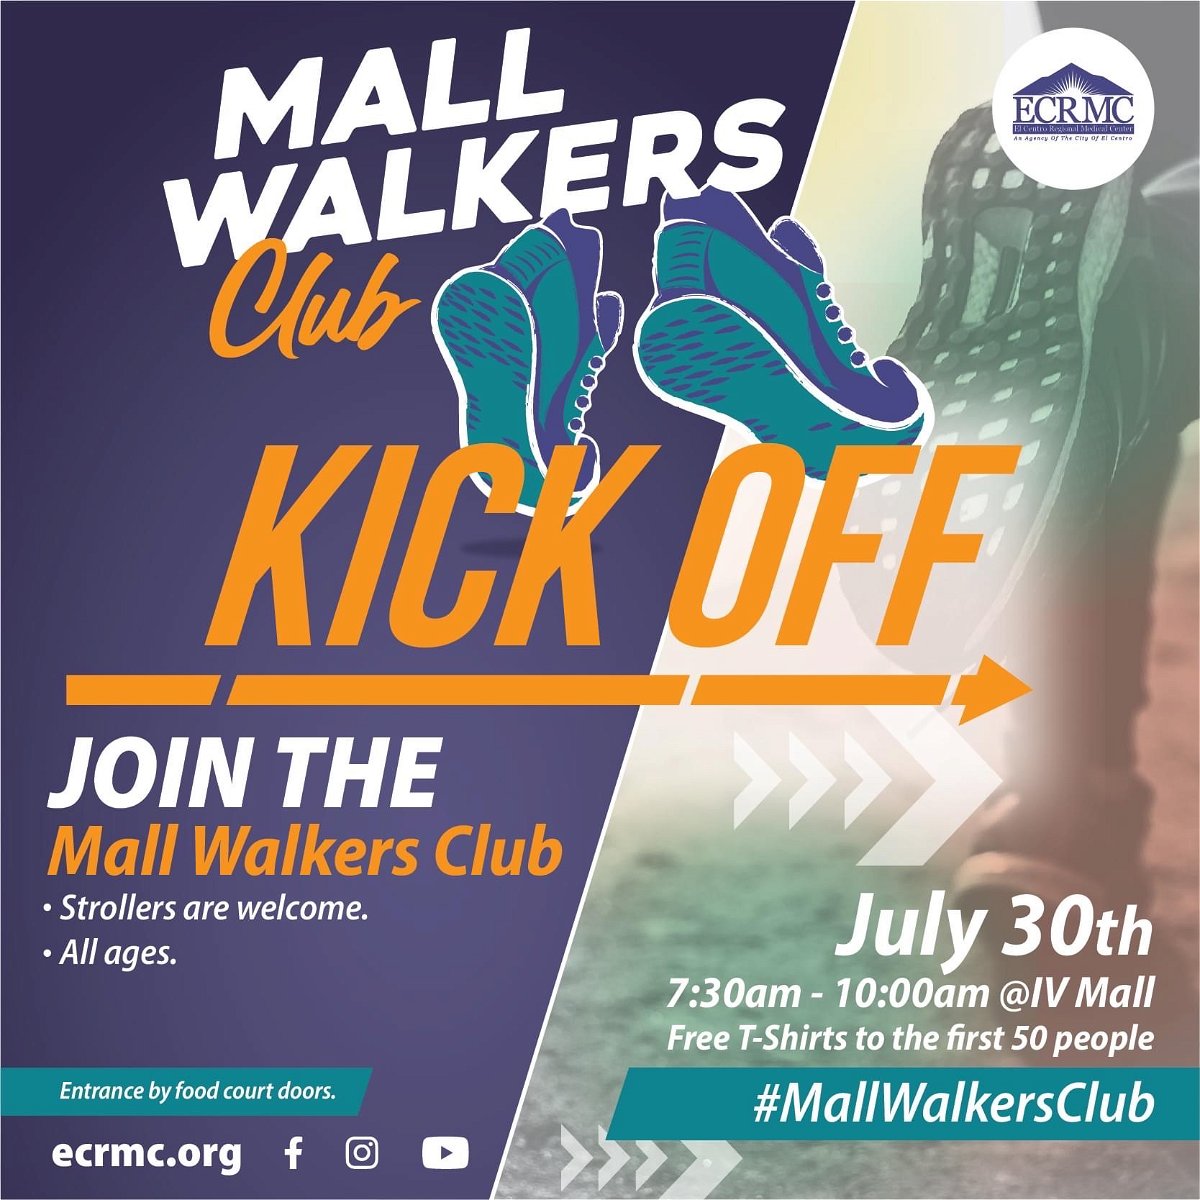 Imperial Valley Mall to host Mall Walkers Club - KYMA